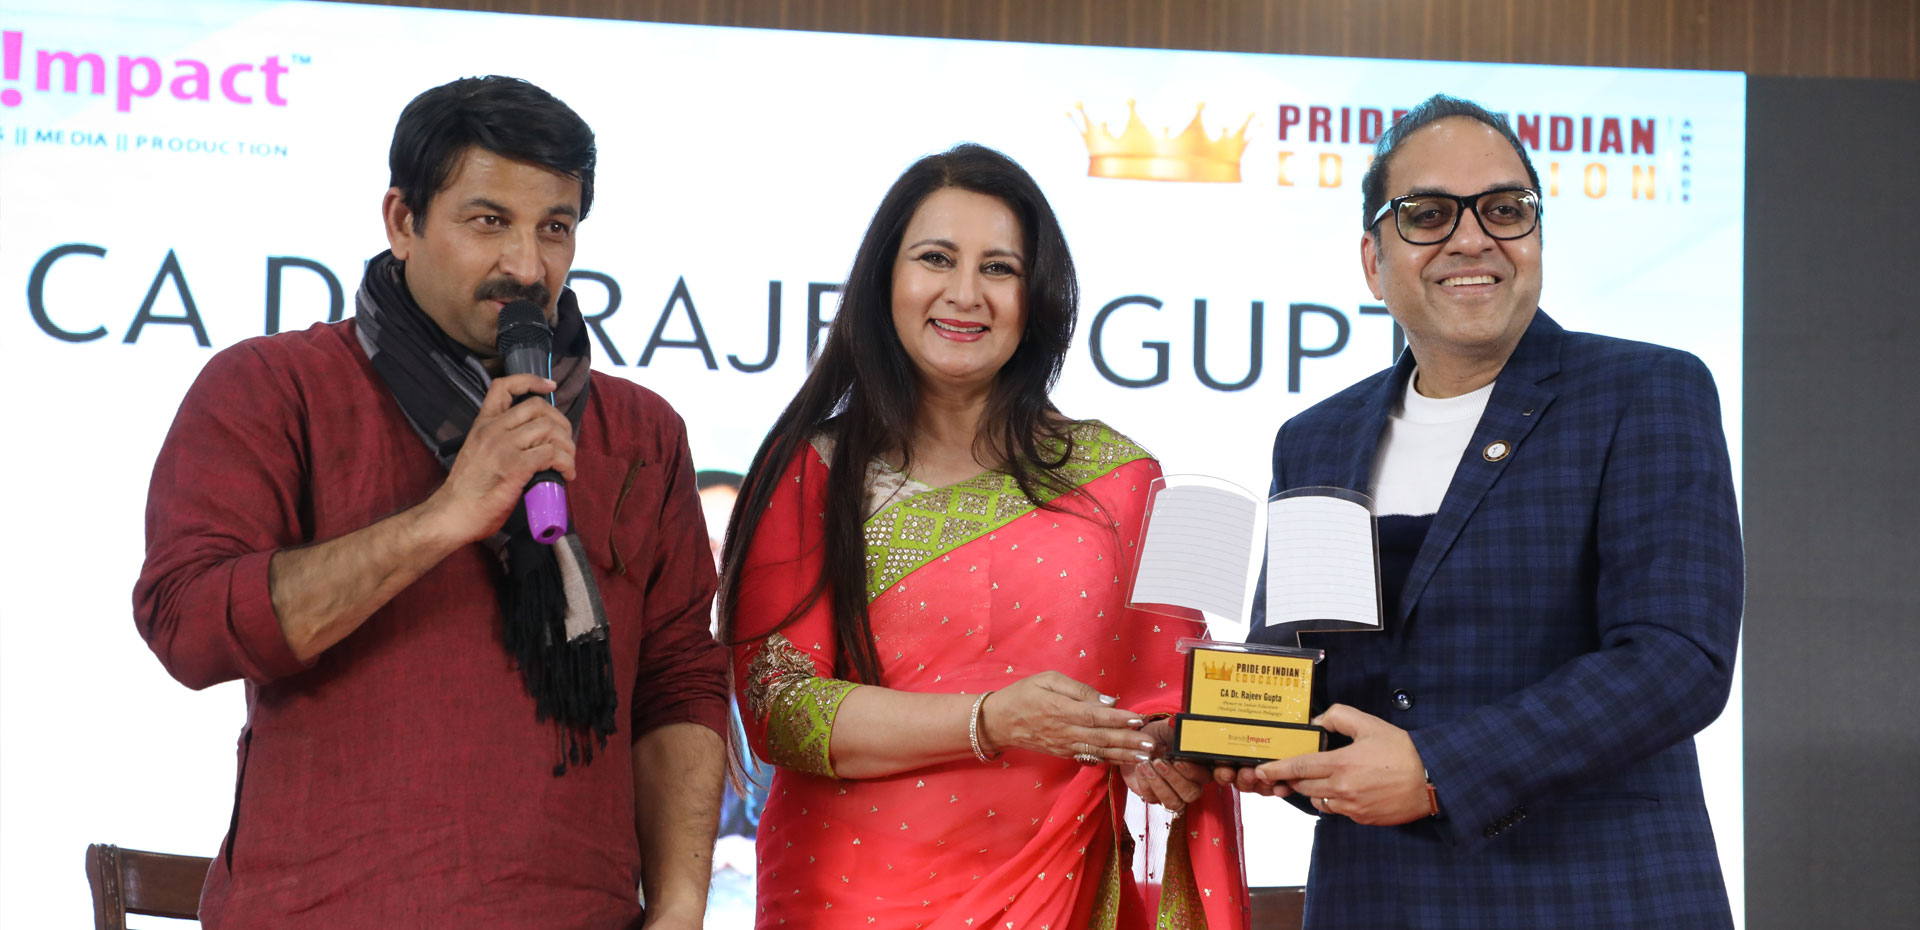 Poonam Dhilon giving award in Rightchoice Award Event